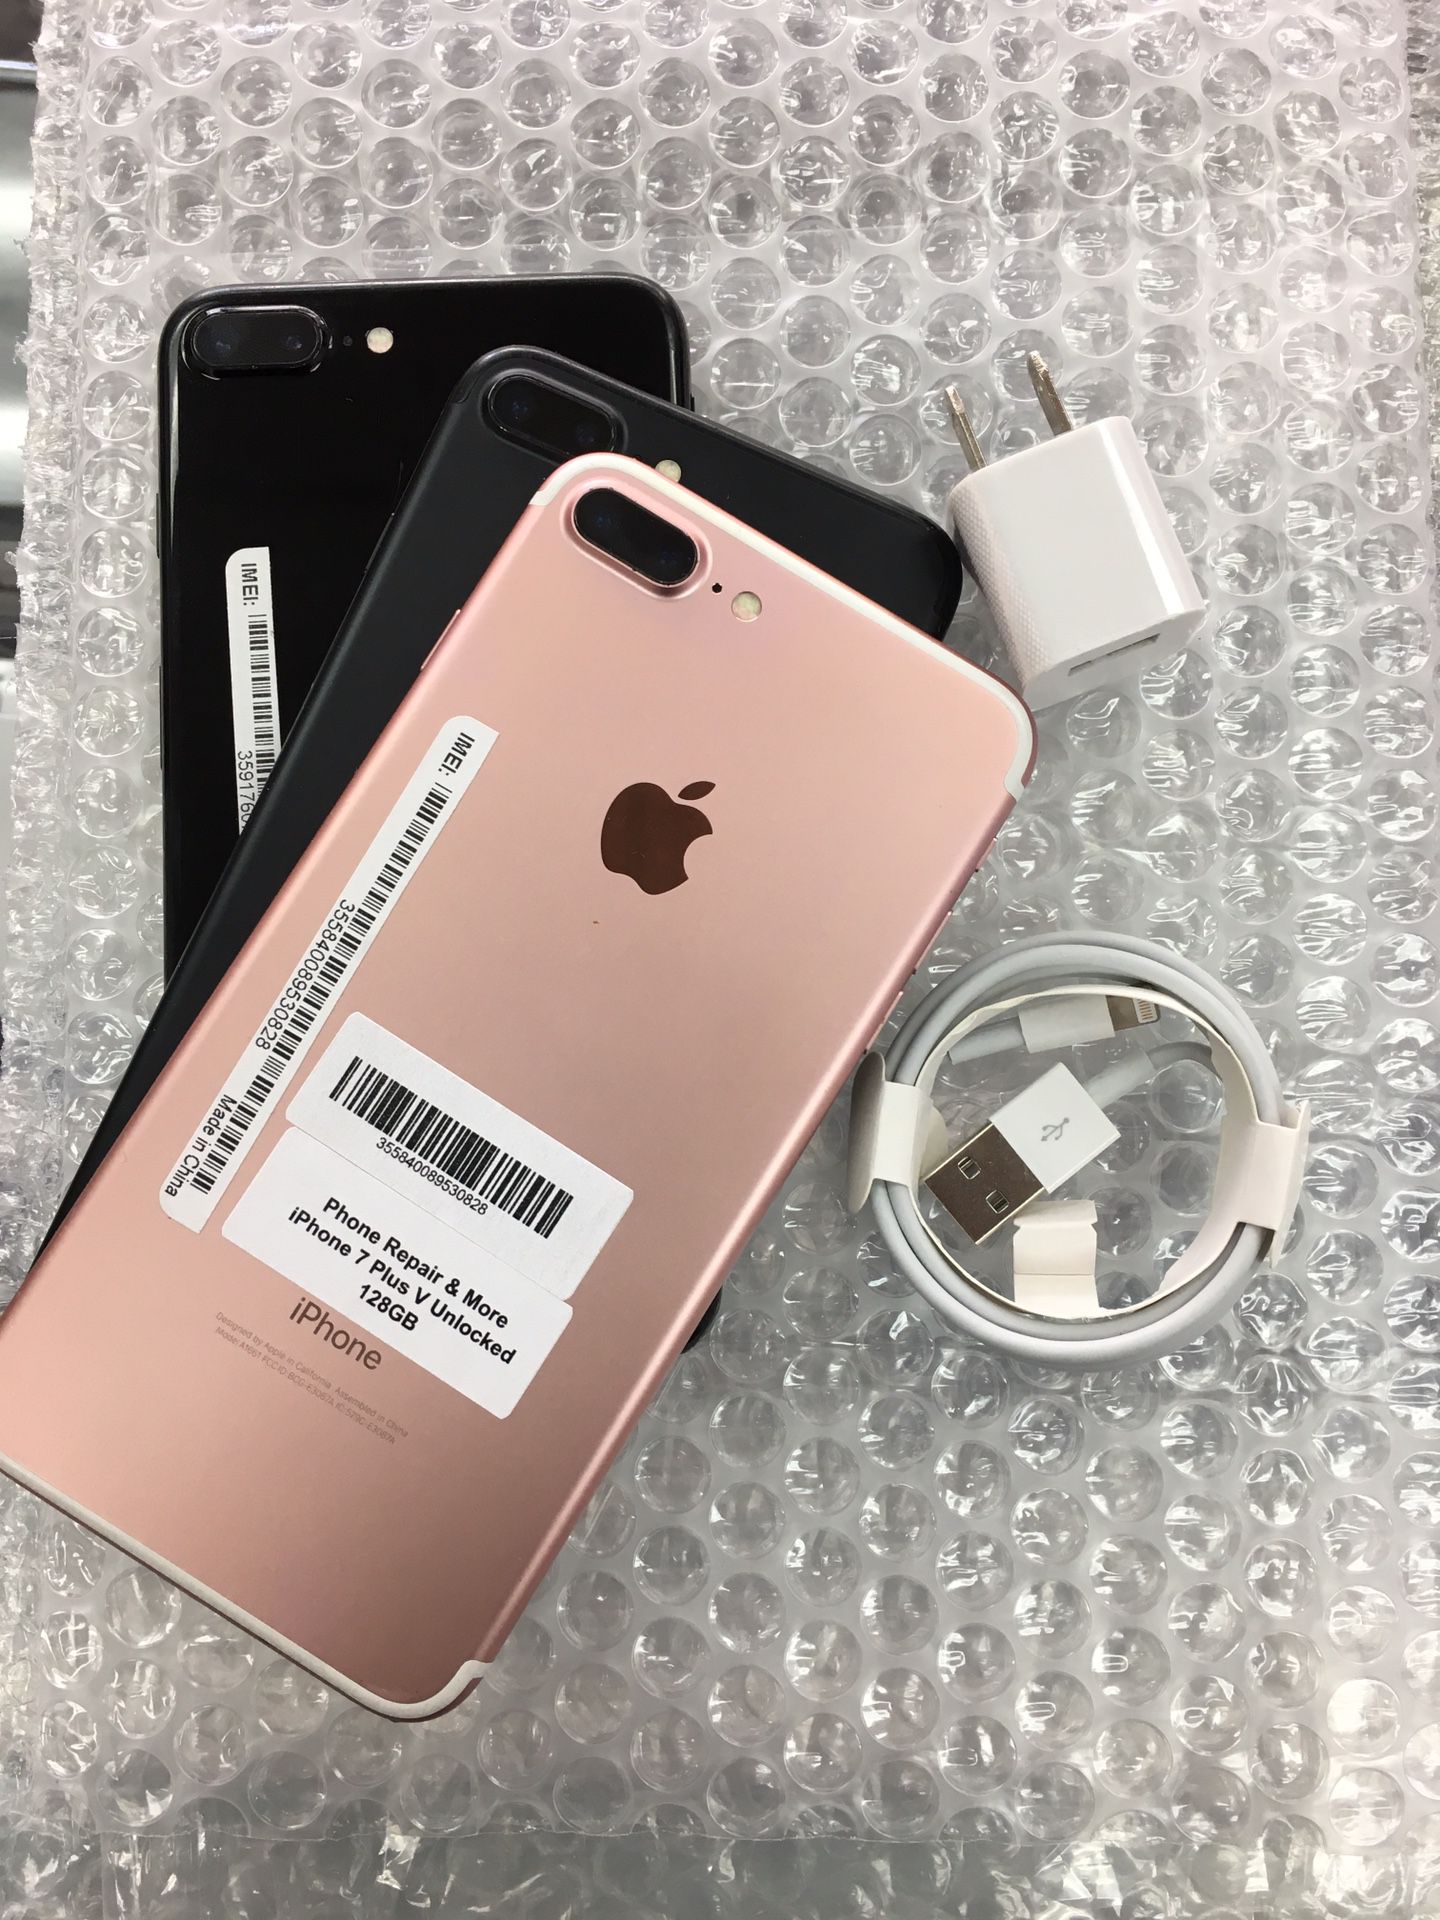 iPhone 7 Plus (32GB , 128GB , 256GB ) Factory Unlocked | 30 Days warranty| All colors Available